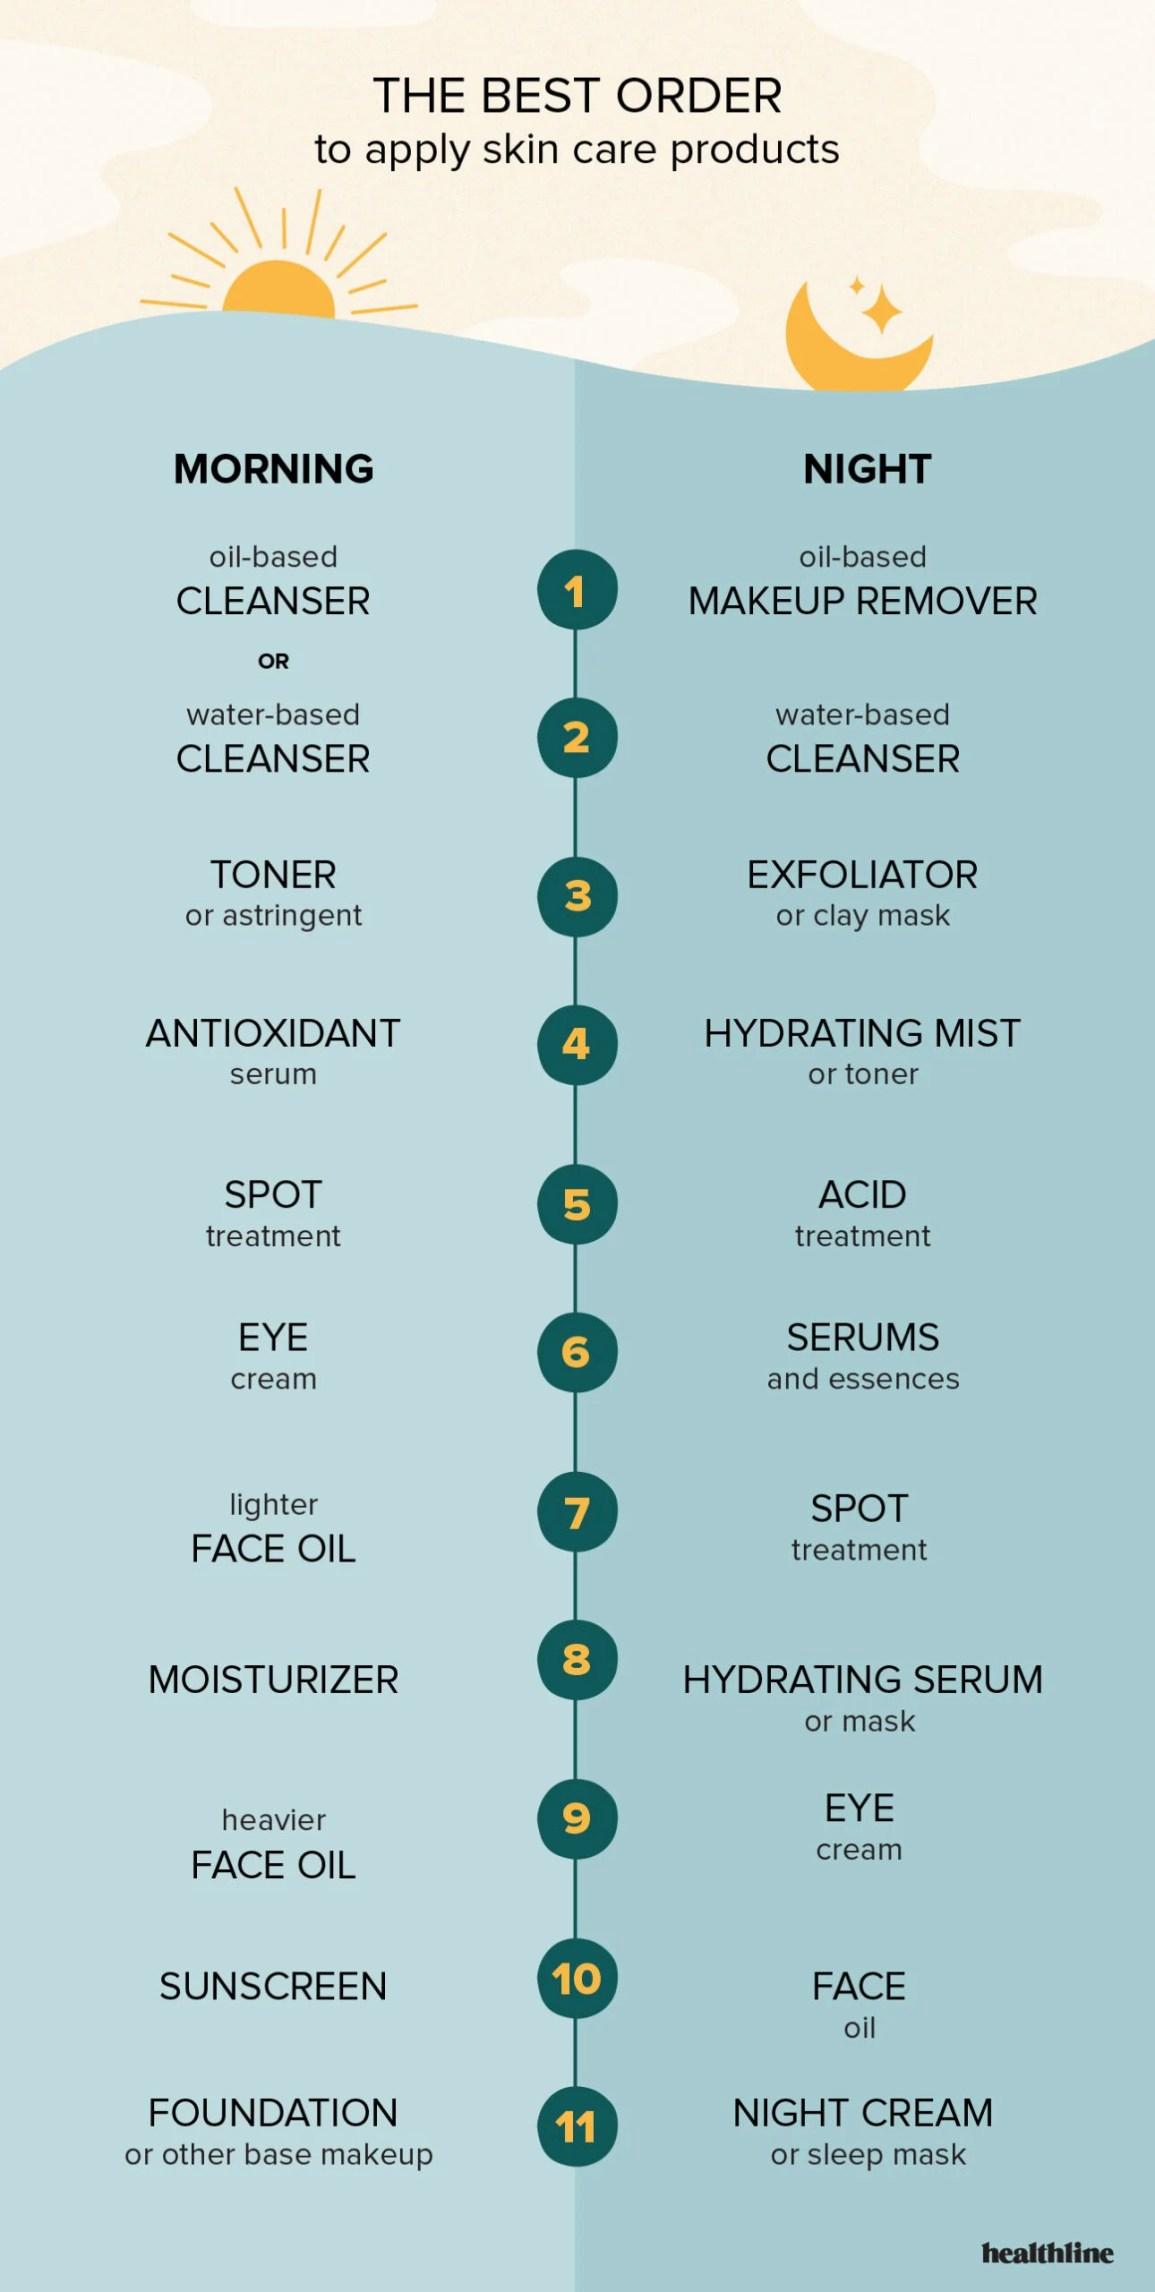 A step-by-step guide to applying skin care products in the morning and at night.